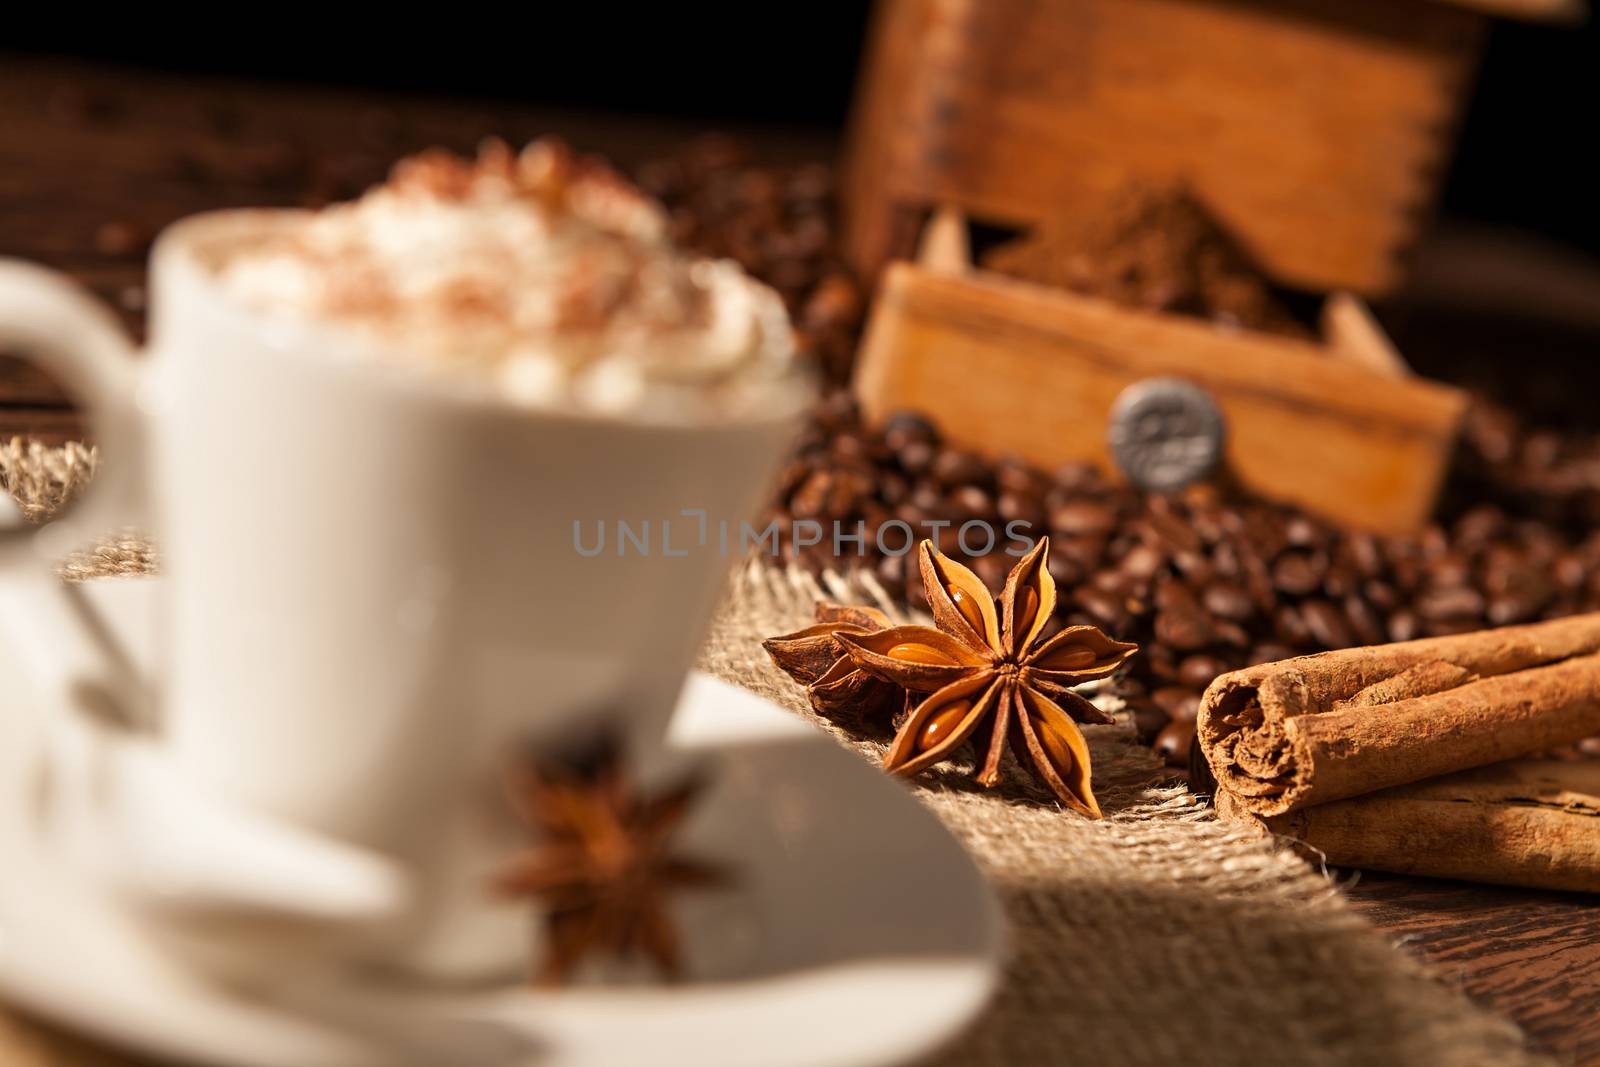 Close-up on star anise and cinnamon sticks with coffee cup and whipped cream